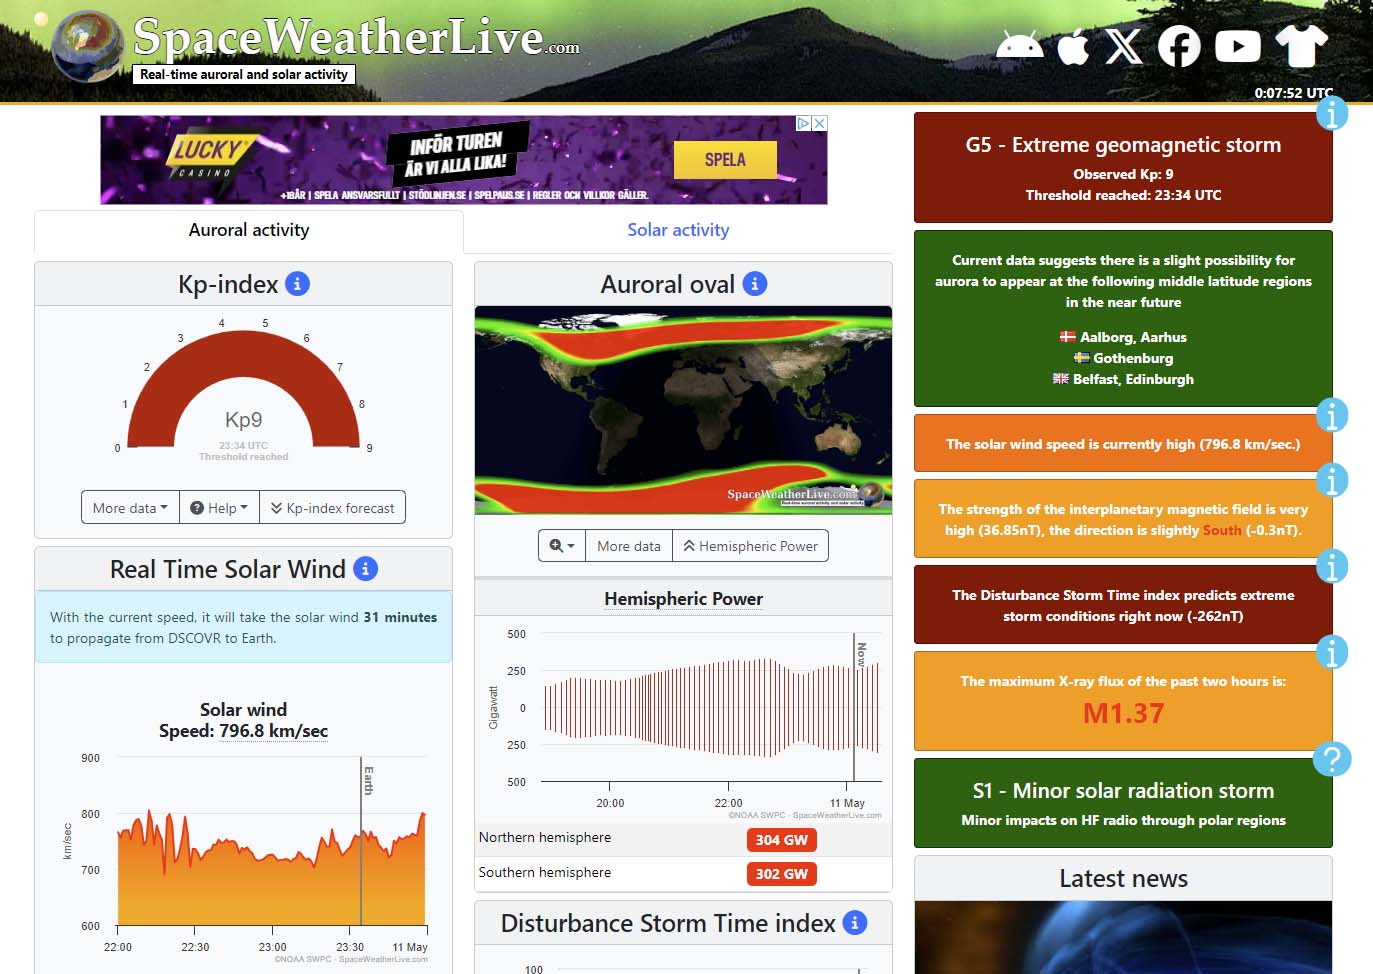 Screenshot of SpaceWeatherLive after the Extreme G5 geomagnetic threshold was reached.